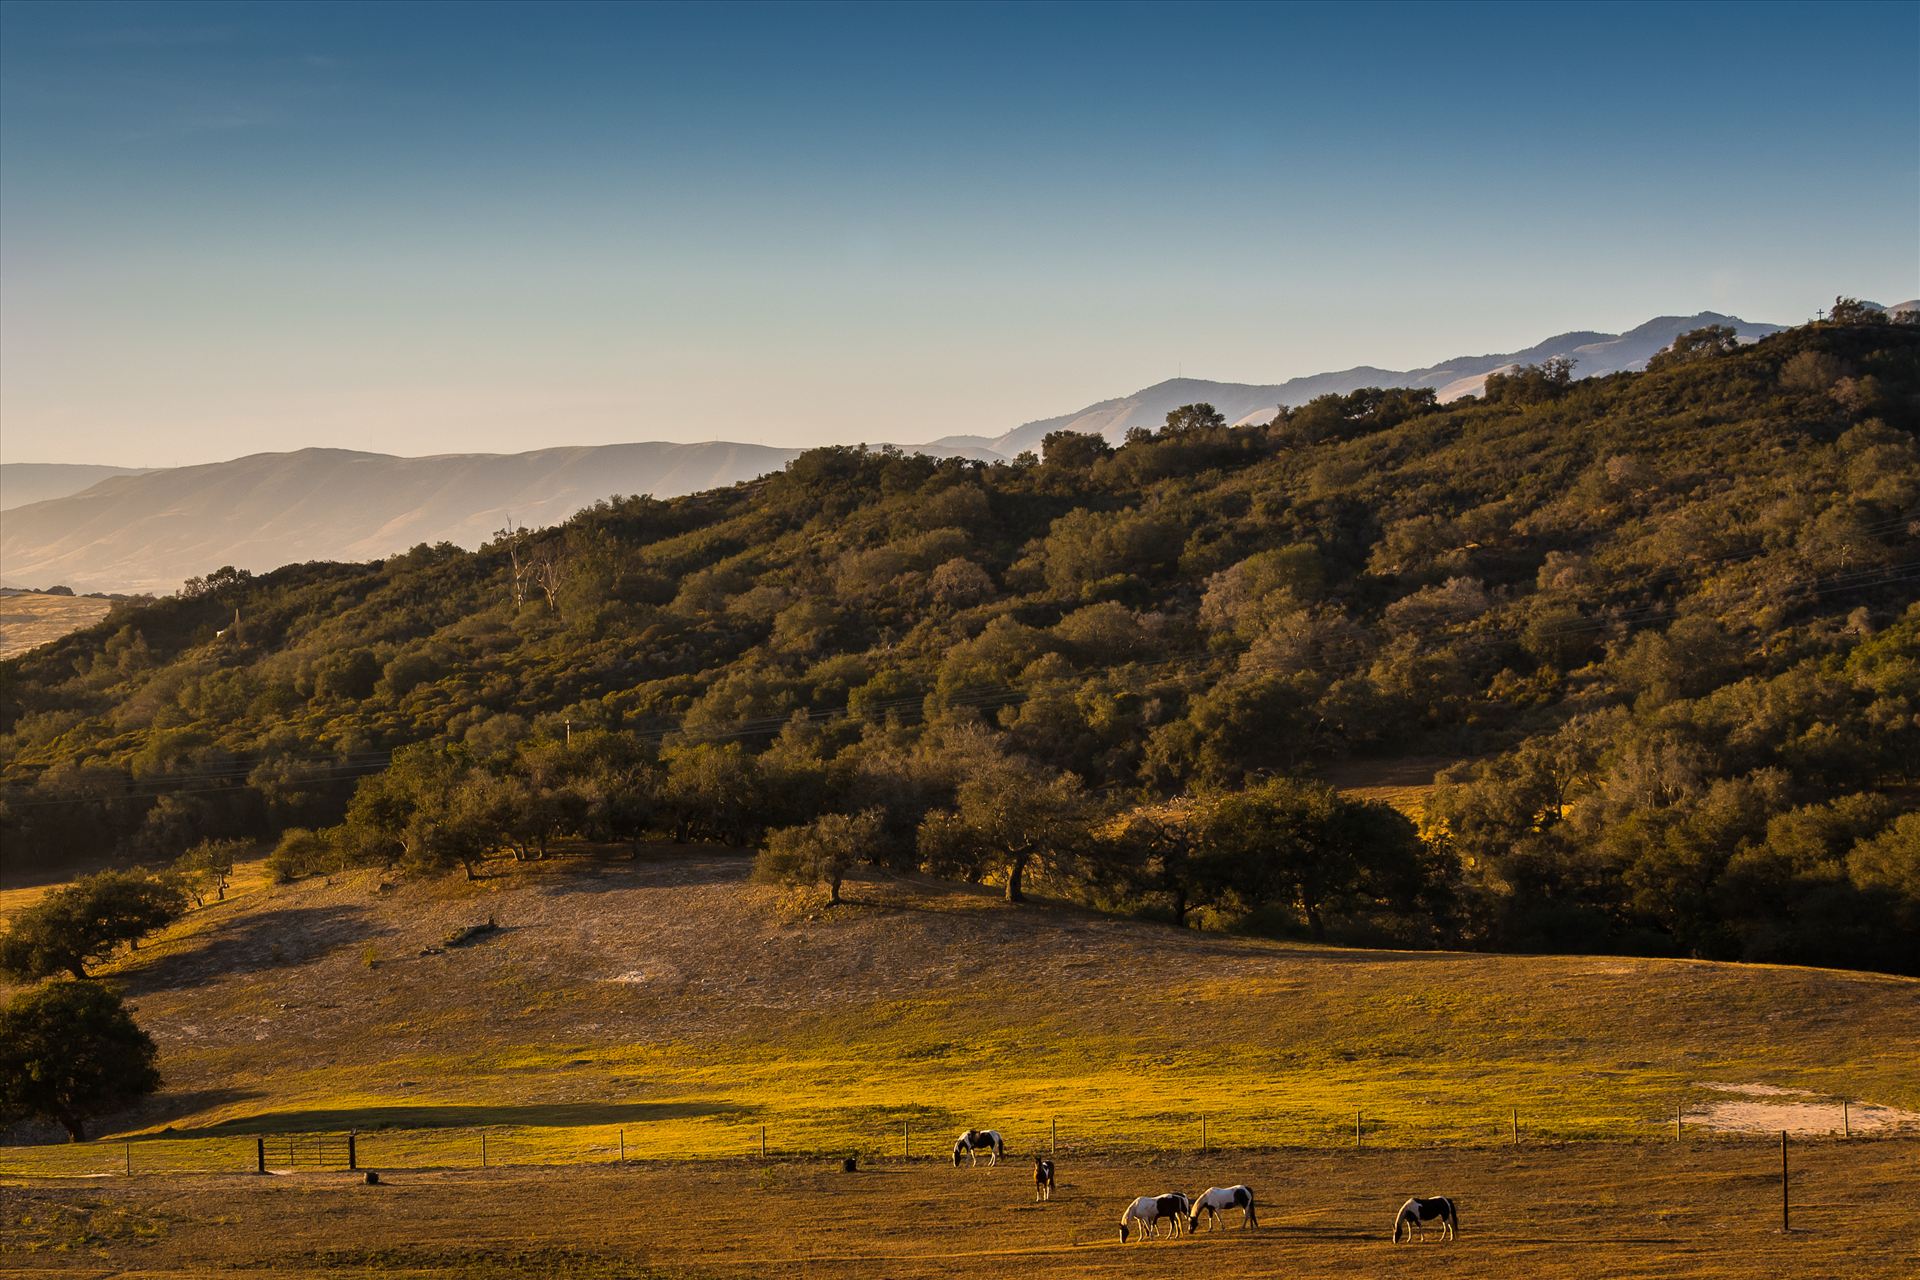 Grazing at Sunset.jpg Horses grazing in a golden field at sunset in Arroyo Grande, California by Sarah Williams